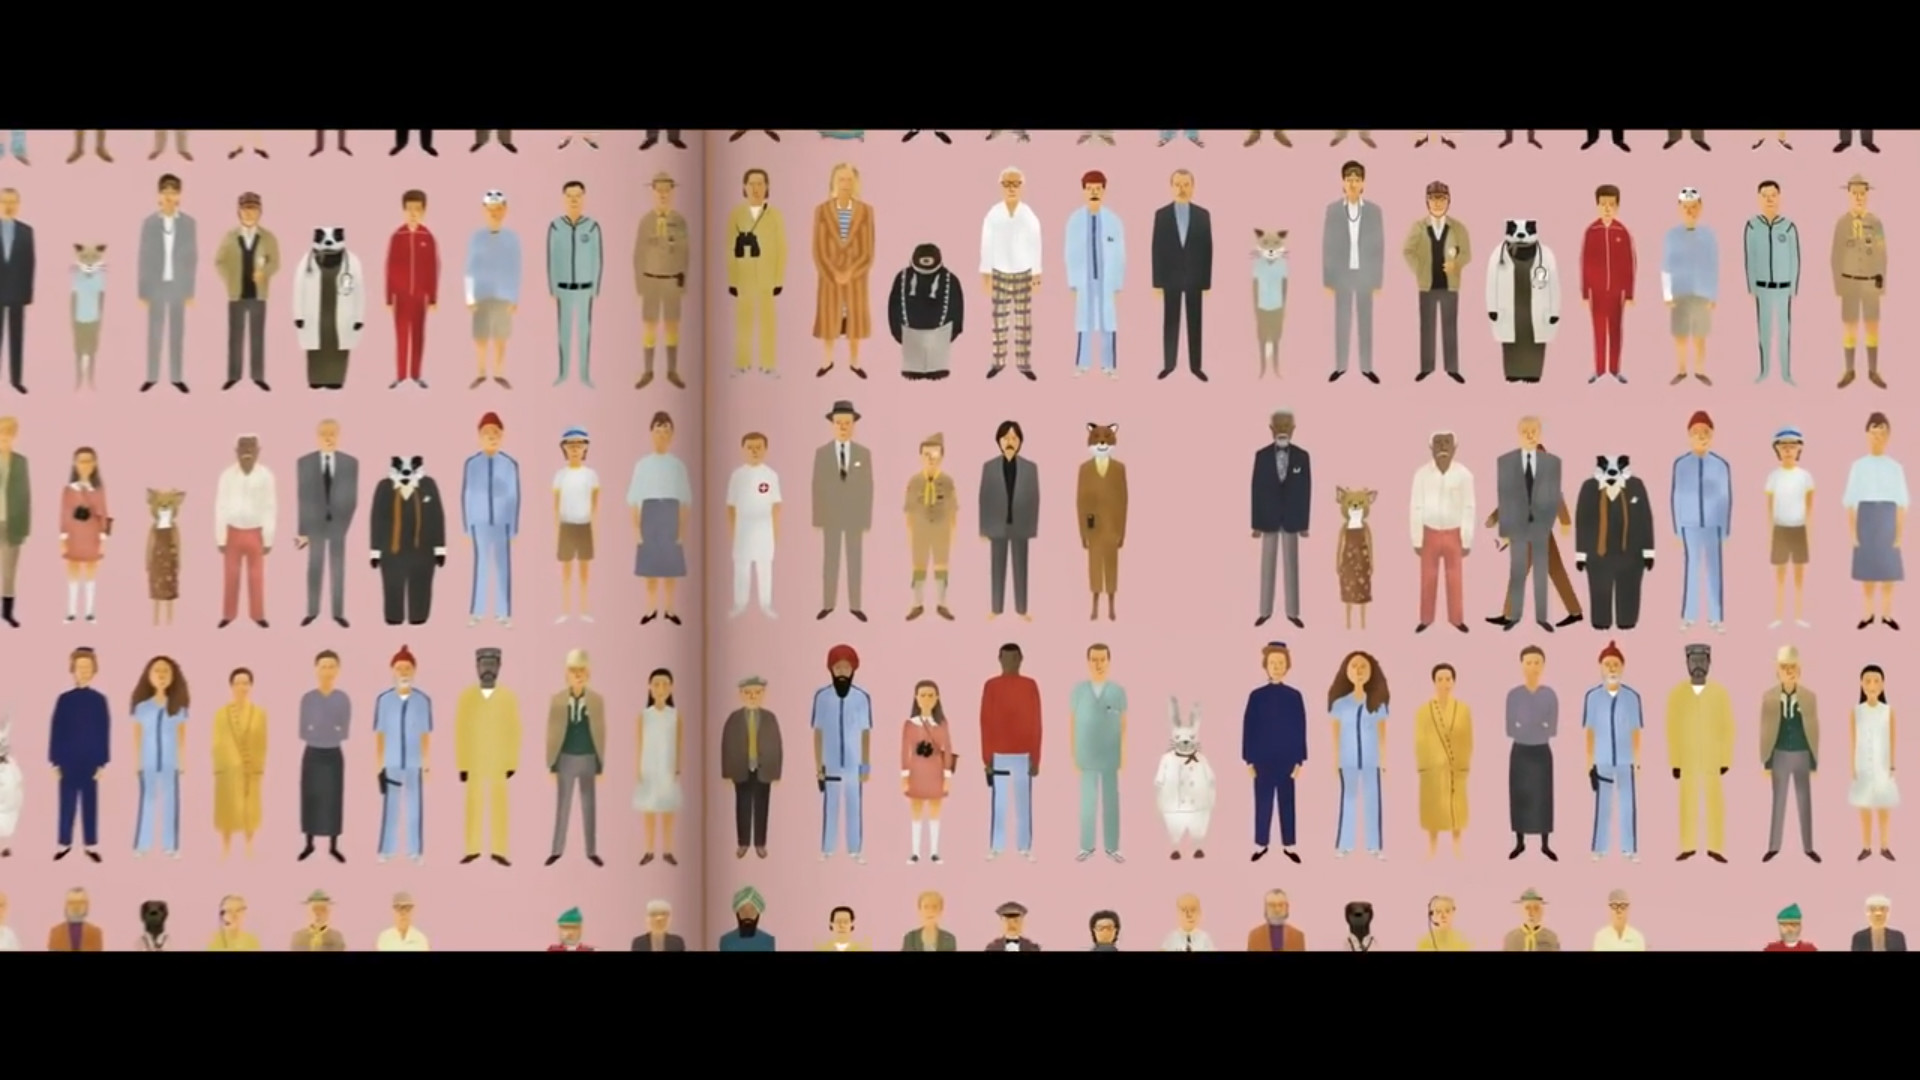 1920x1080 Wes Anderson Rushmore Wallpaper -wes-anderson-collection-5